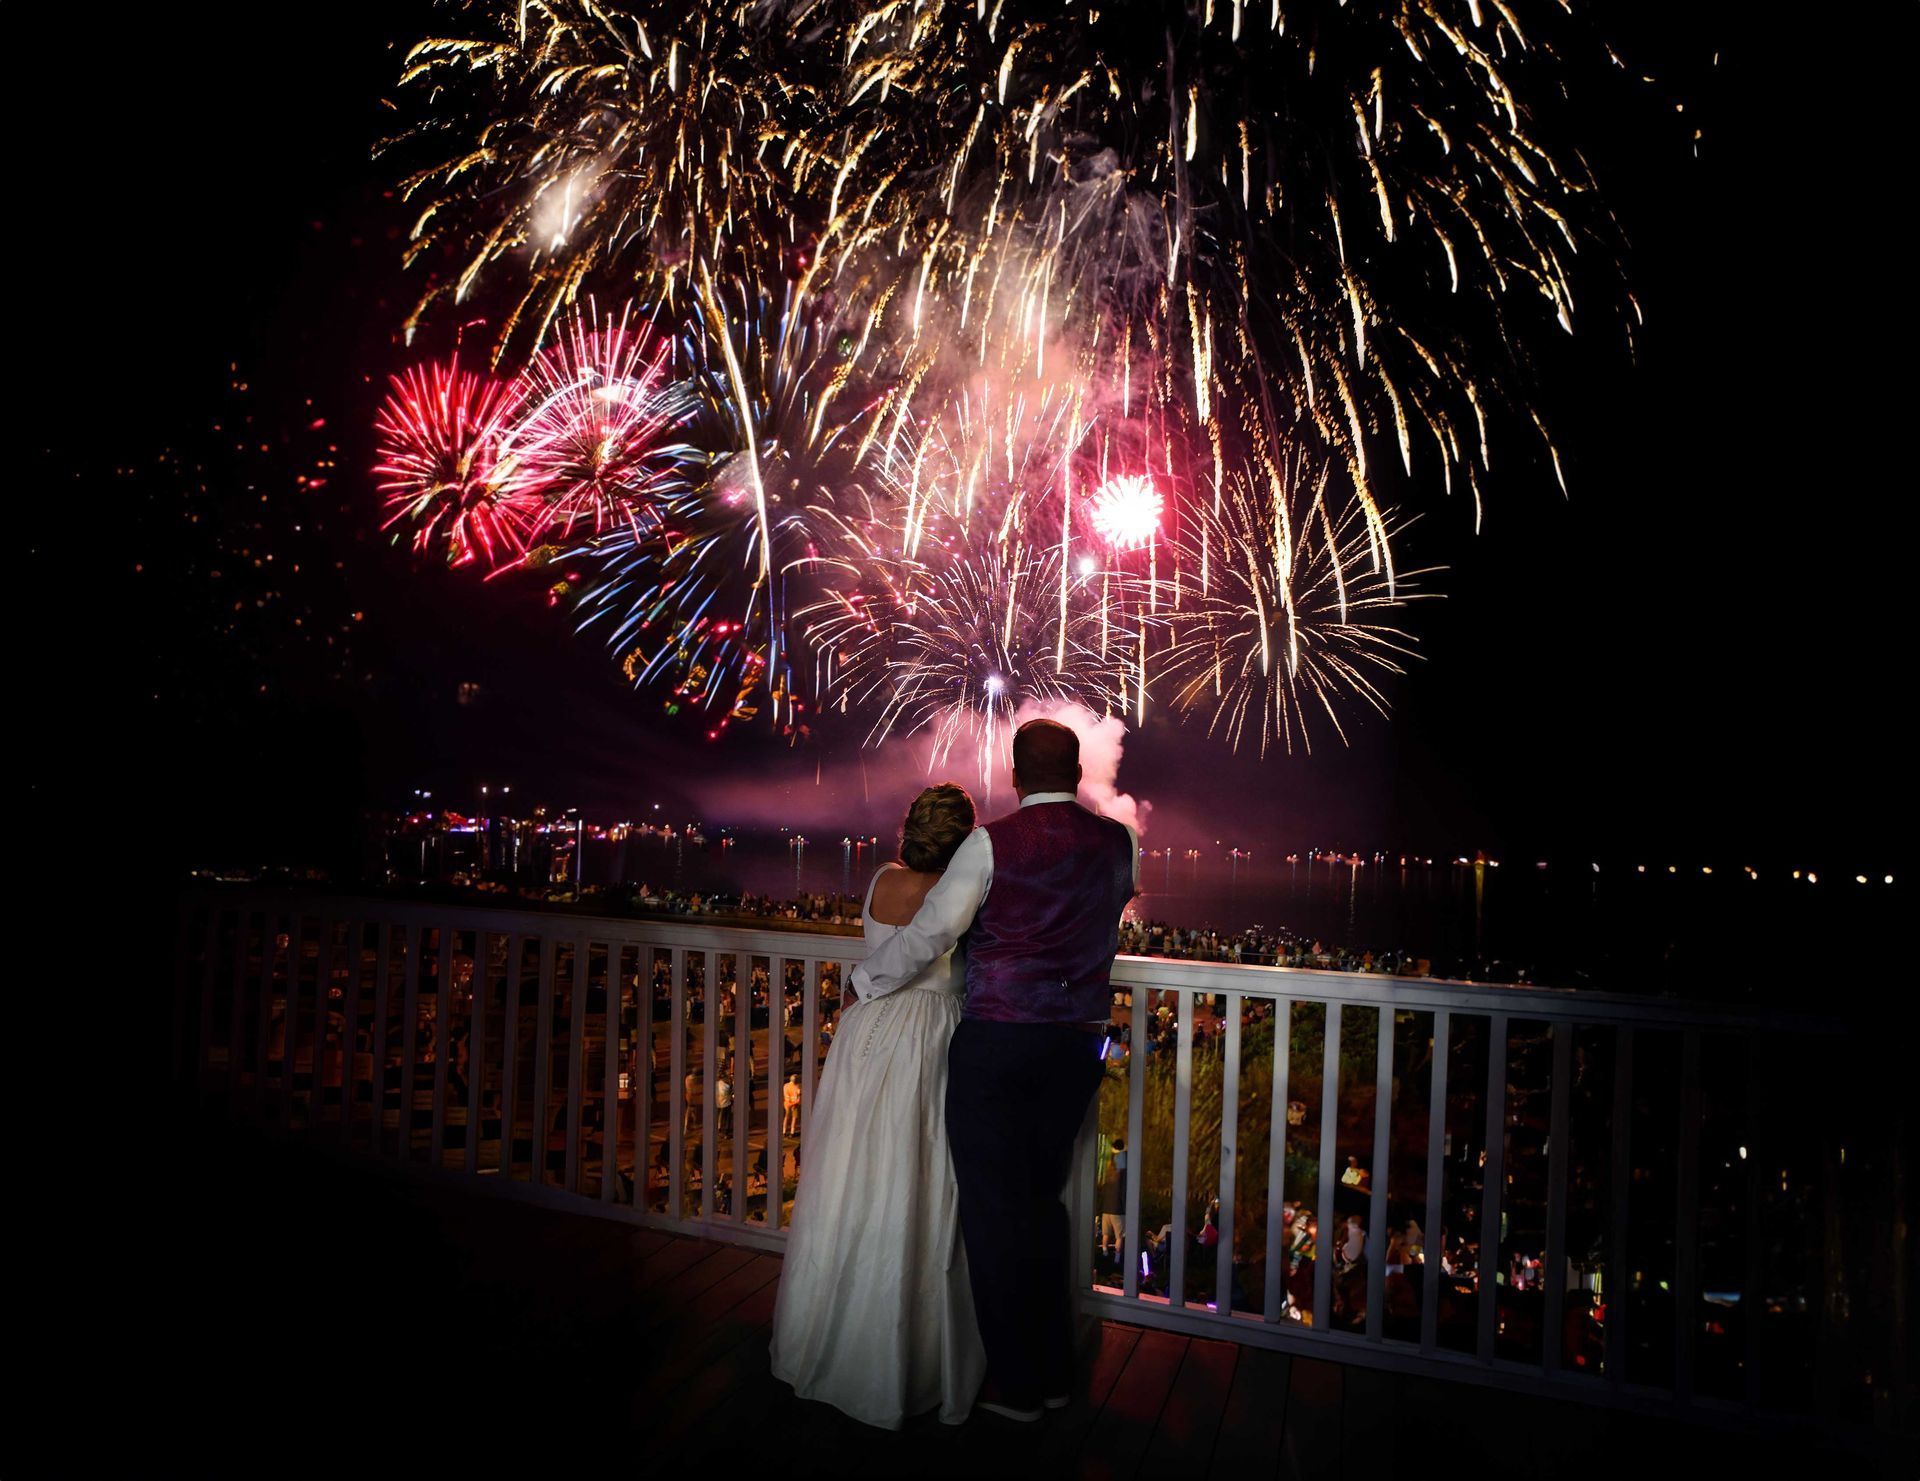 a bride and groom watch fireworks on a balcony after major photo retouching